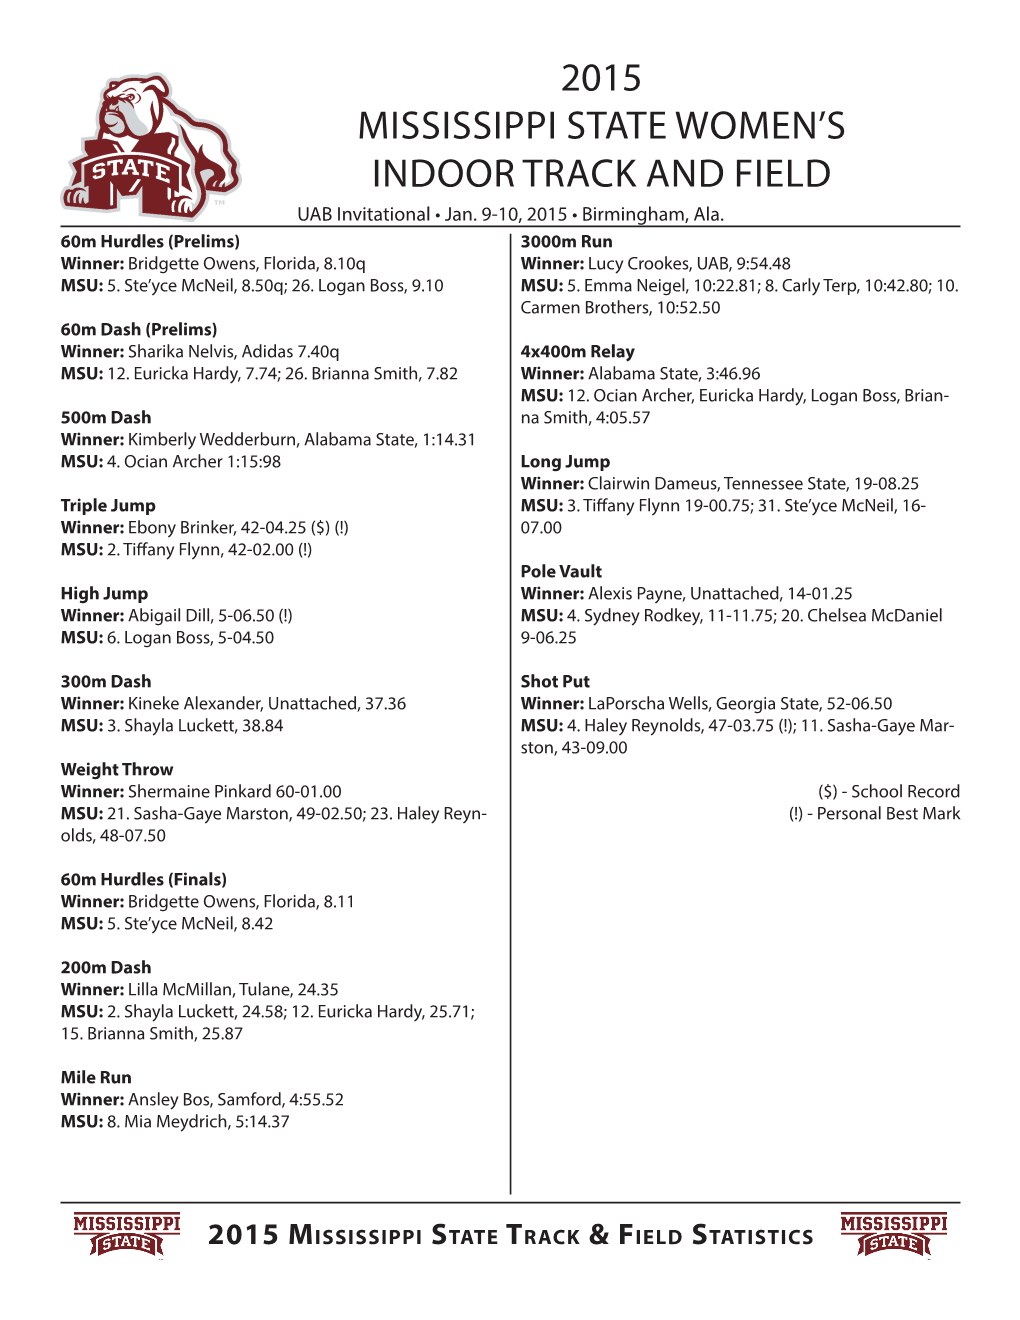 2015 Mississippi State Women's Indoor Track and Field